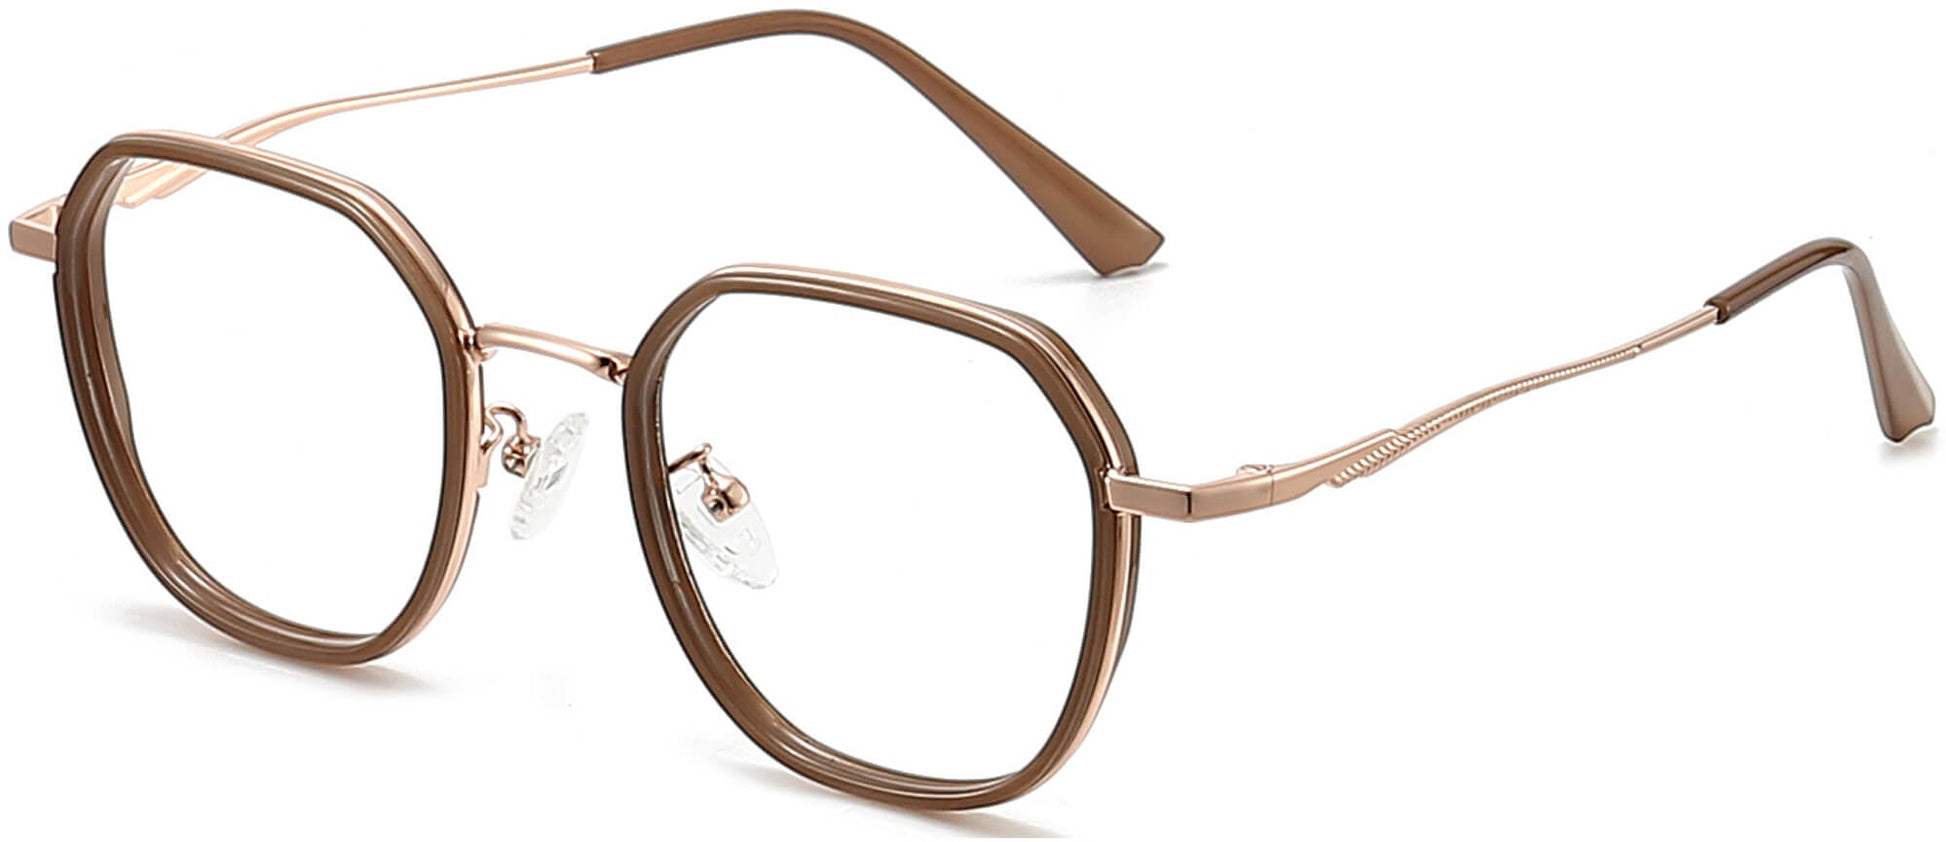 Maddison Square Brown Eyeglasses from ANRRI, angle view